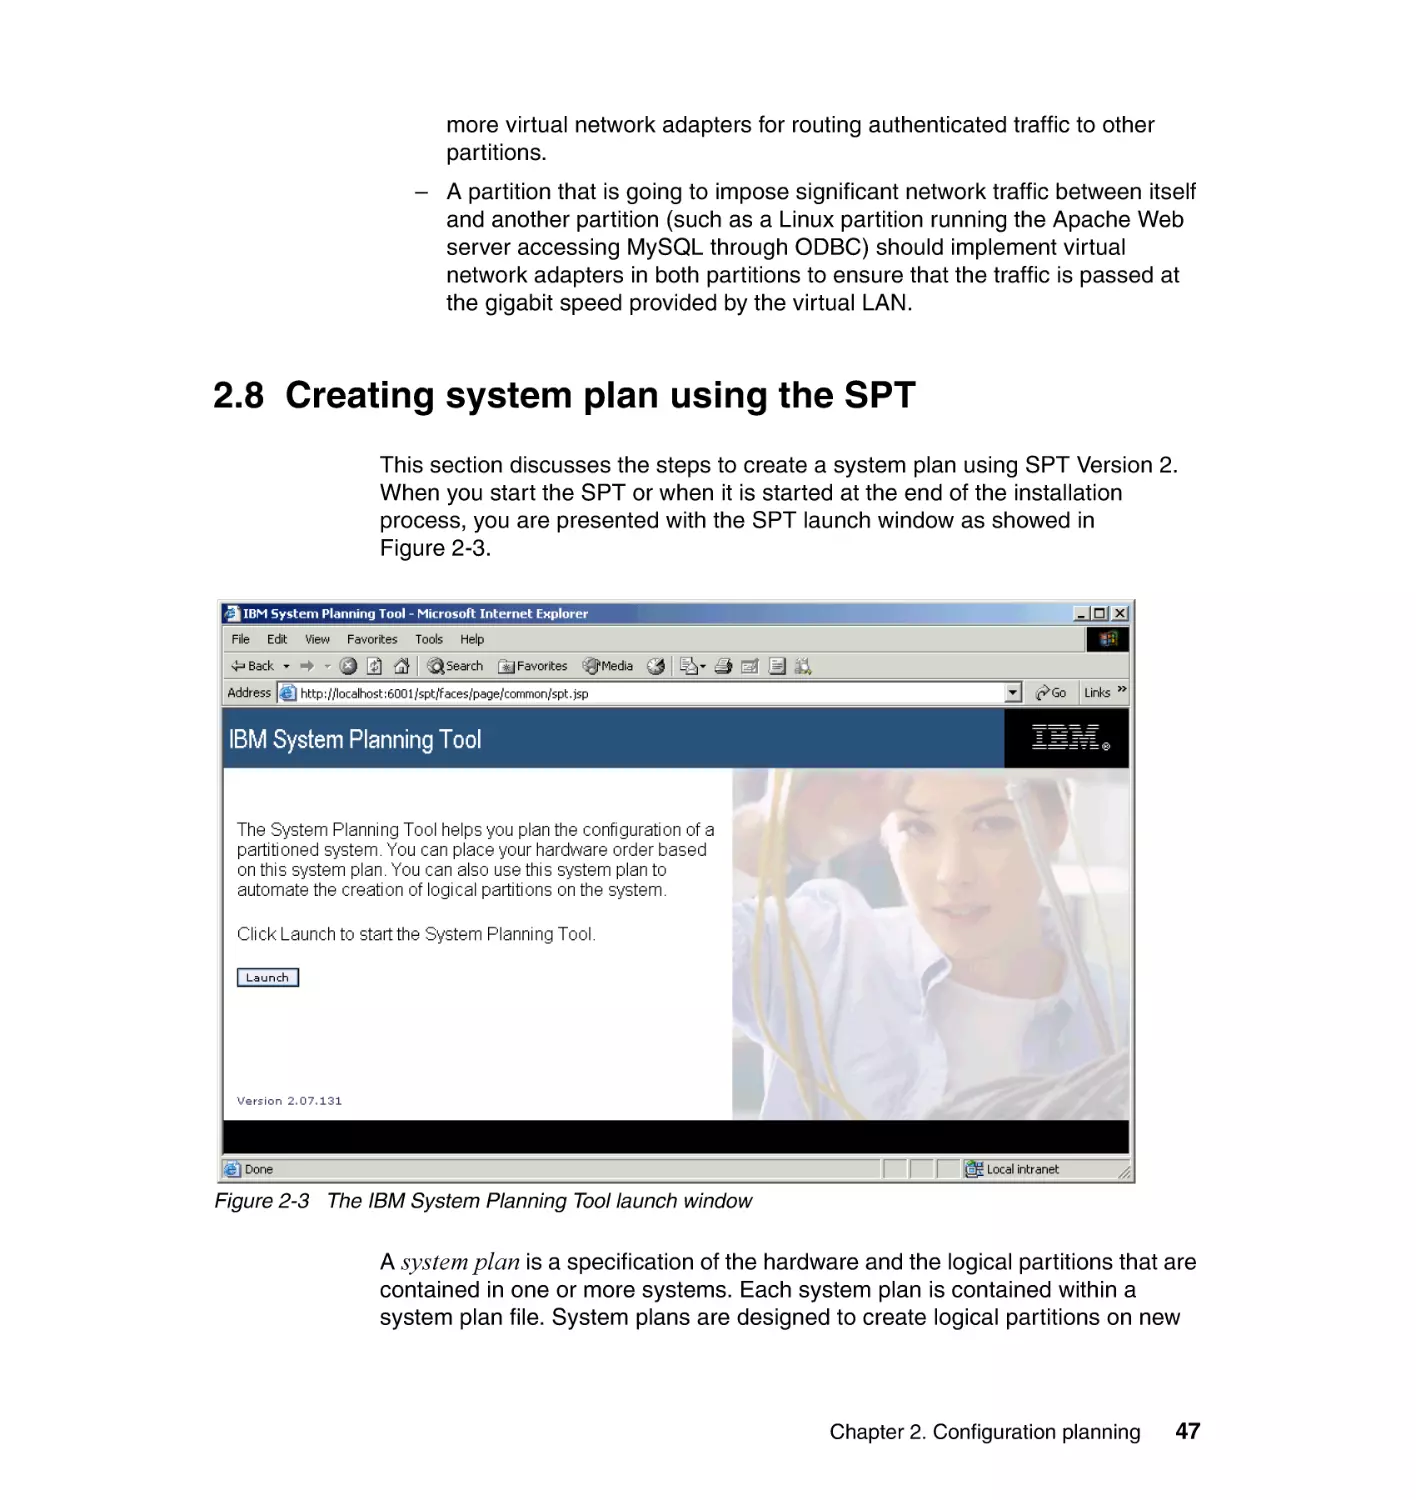 2.8 Creating system plan using the SPT